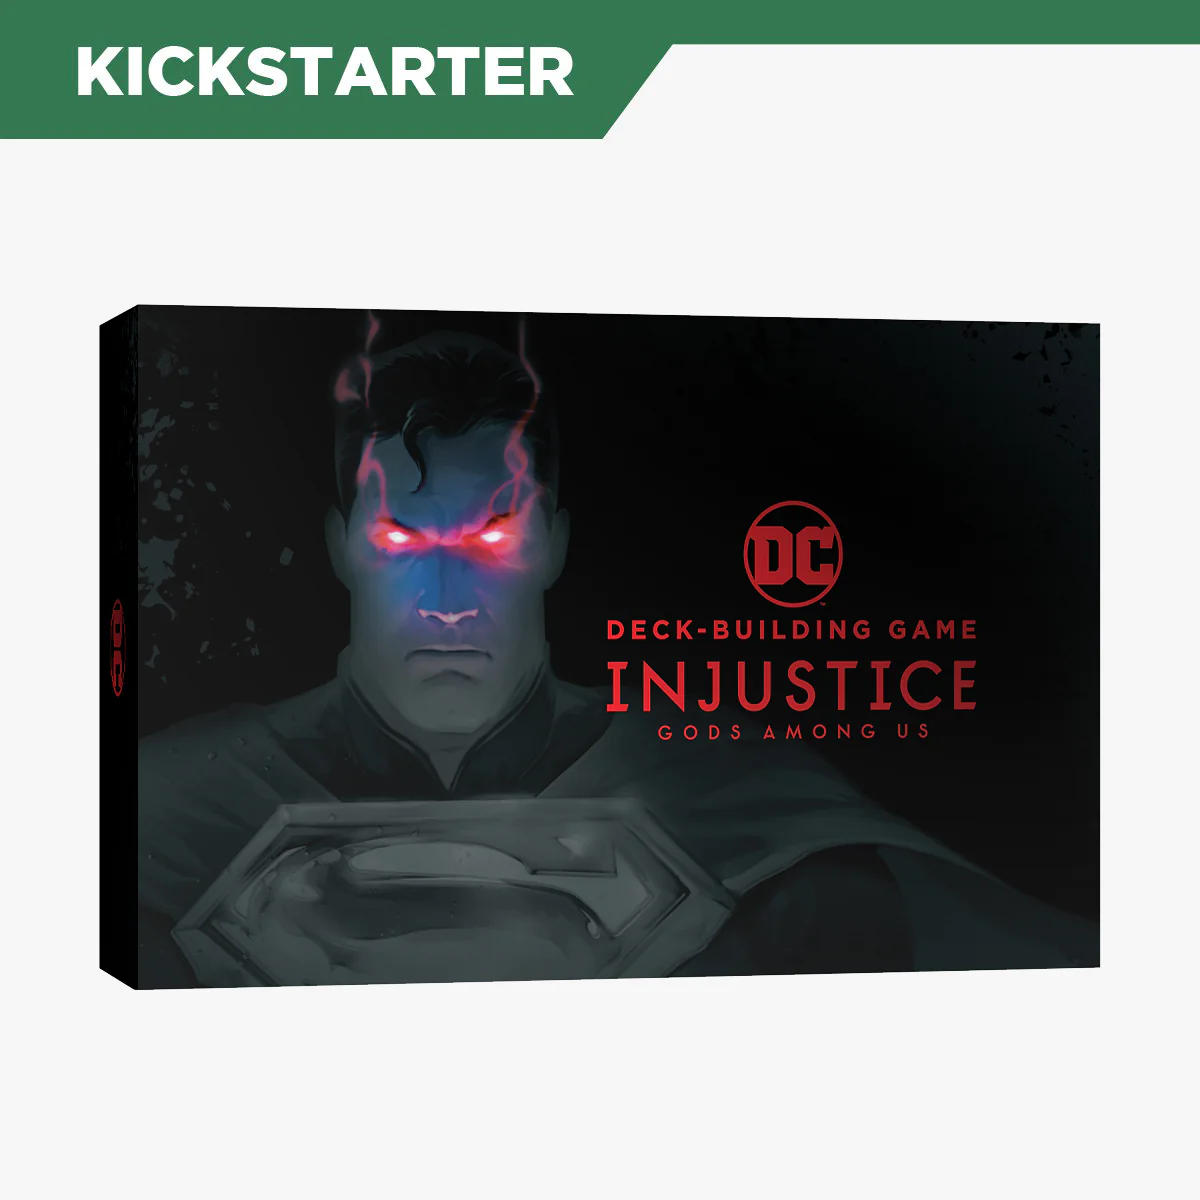 DC Deck-Building Game: Injustice (KS Welcome to the Multiverse Pledge)